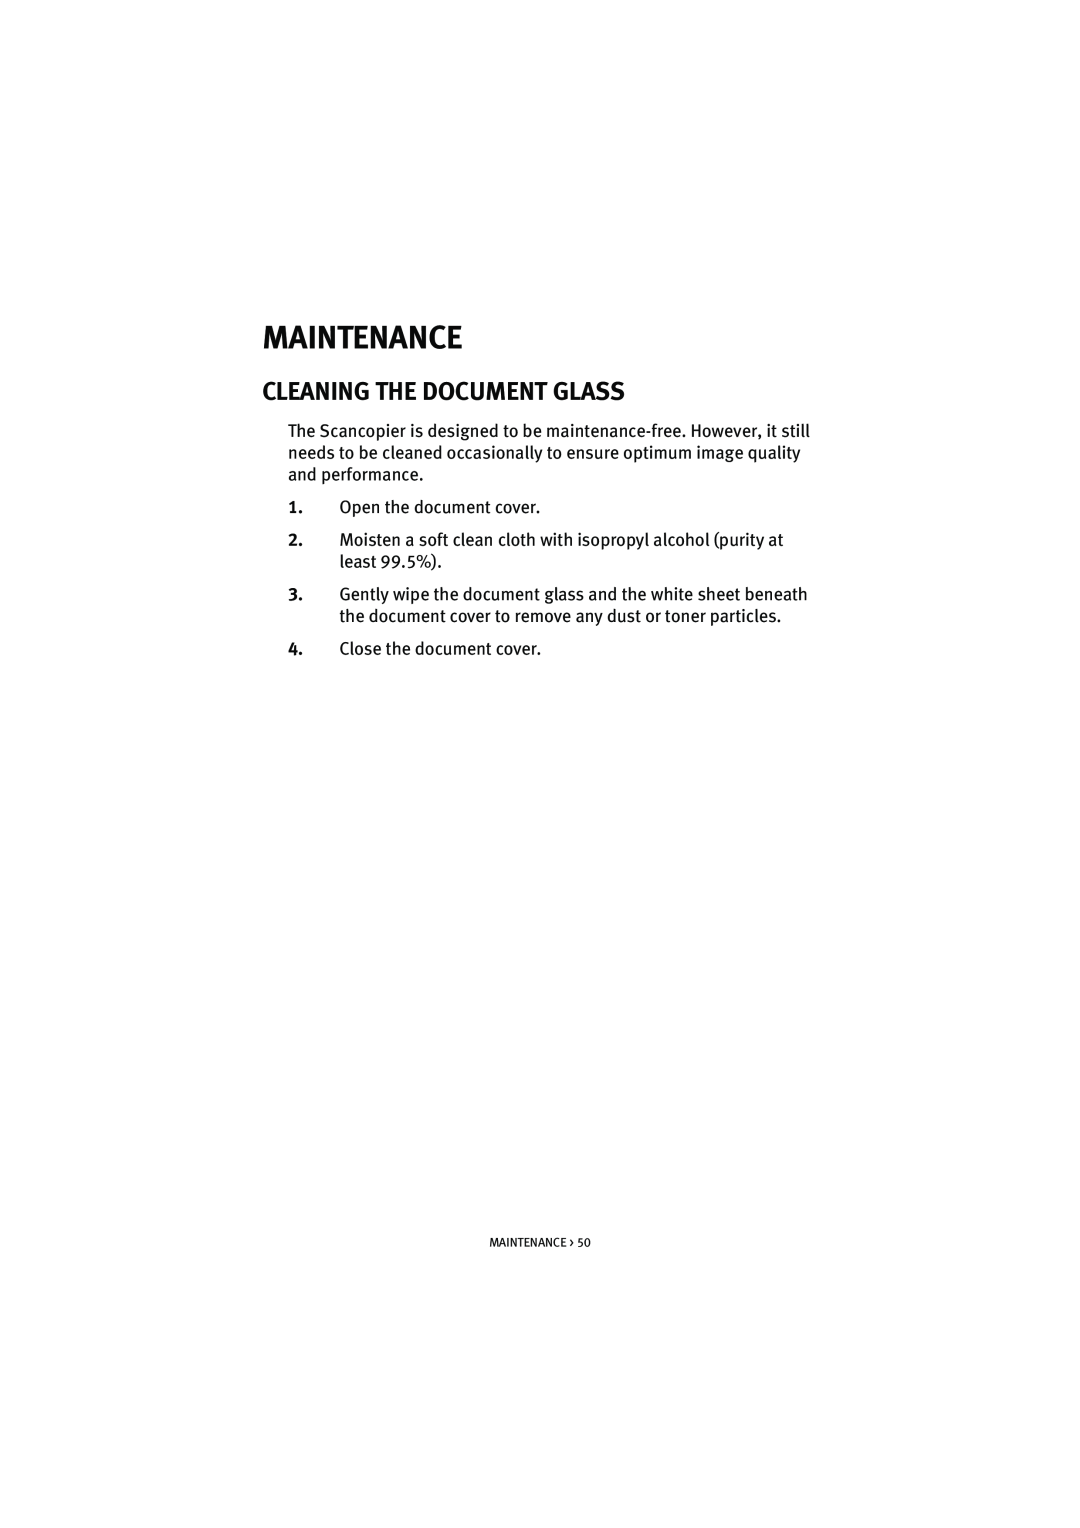 Oki S700 manual Maintenance, Cleaning The Document Glass 